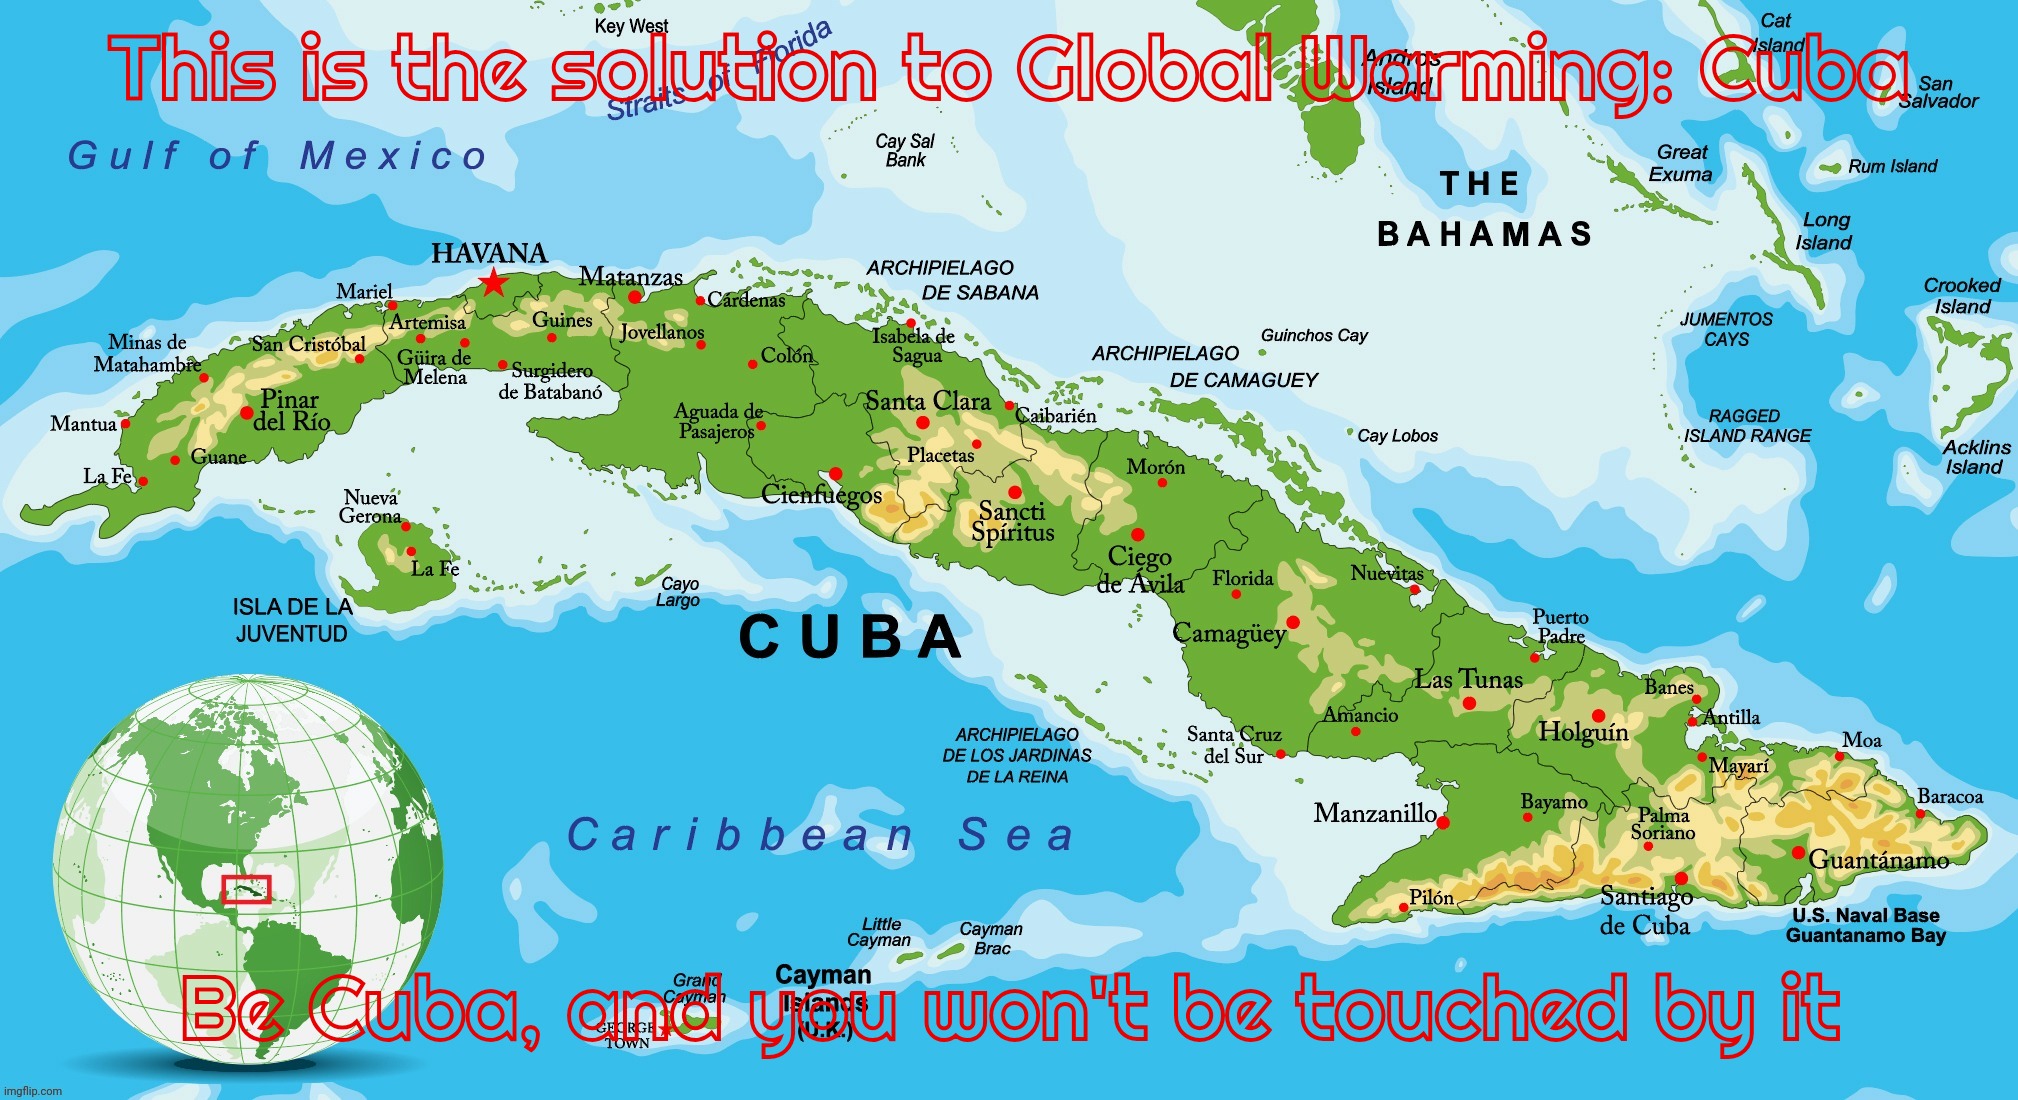 Despite being surrounded by tropical areas devastated by tropical warmth, Cuba has been curiously unaffected by it | This is the solution to Global Warming: Cuba; Be Cuba, and you won't be touched by it | image tagged in cuba,global warming,climate change,glowball shamming,climate derangement,cuba is immune to global warming | made w/ Imgflip meme maker